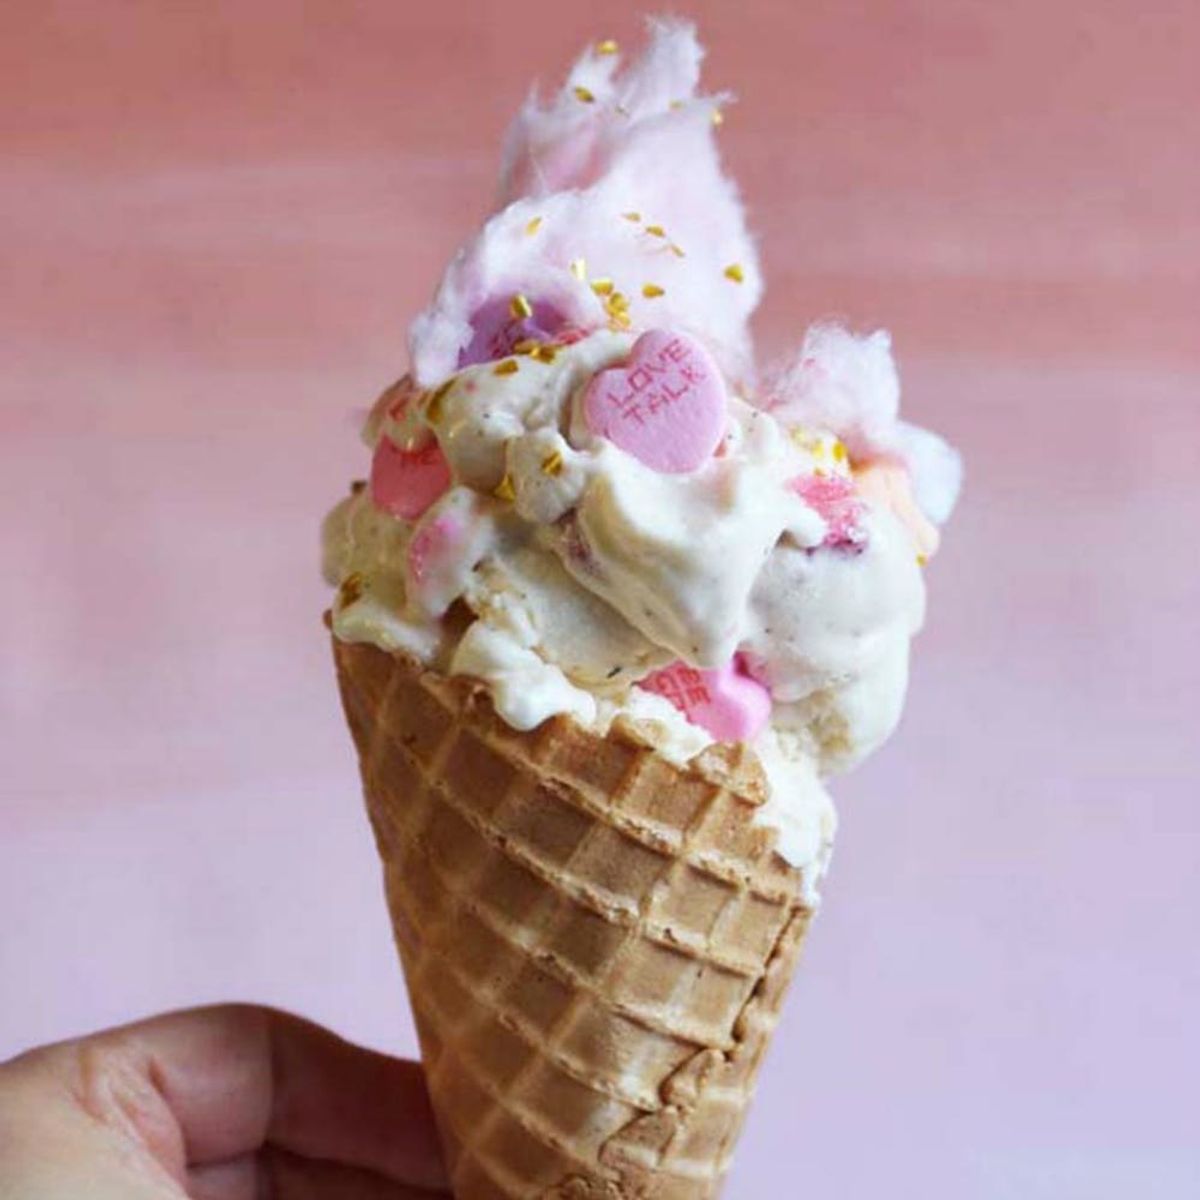 19 Cotton Candy, Unicorn and Other Magical Ice Cream Trends Dominating Instagram